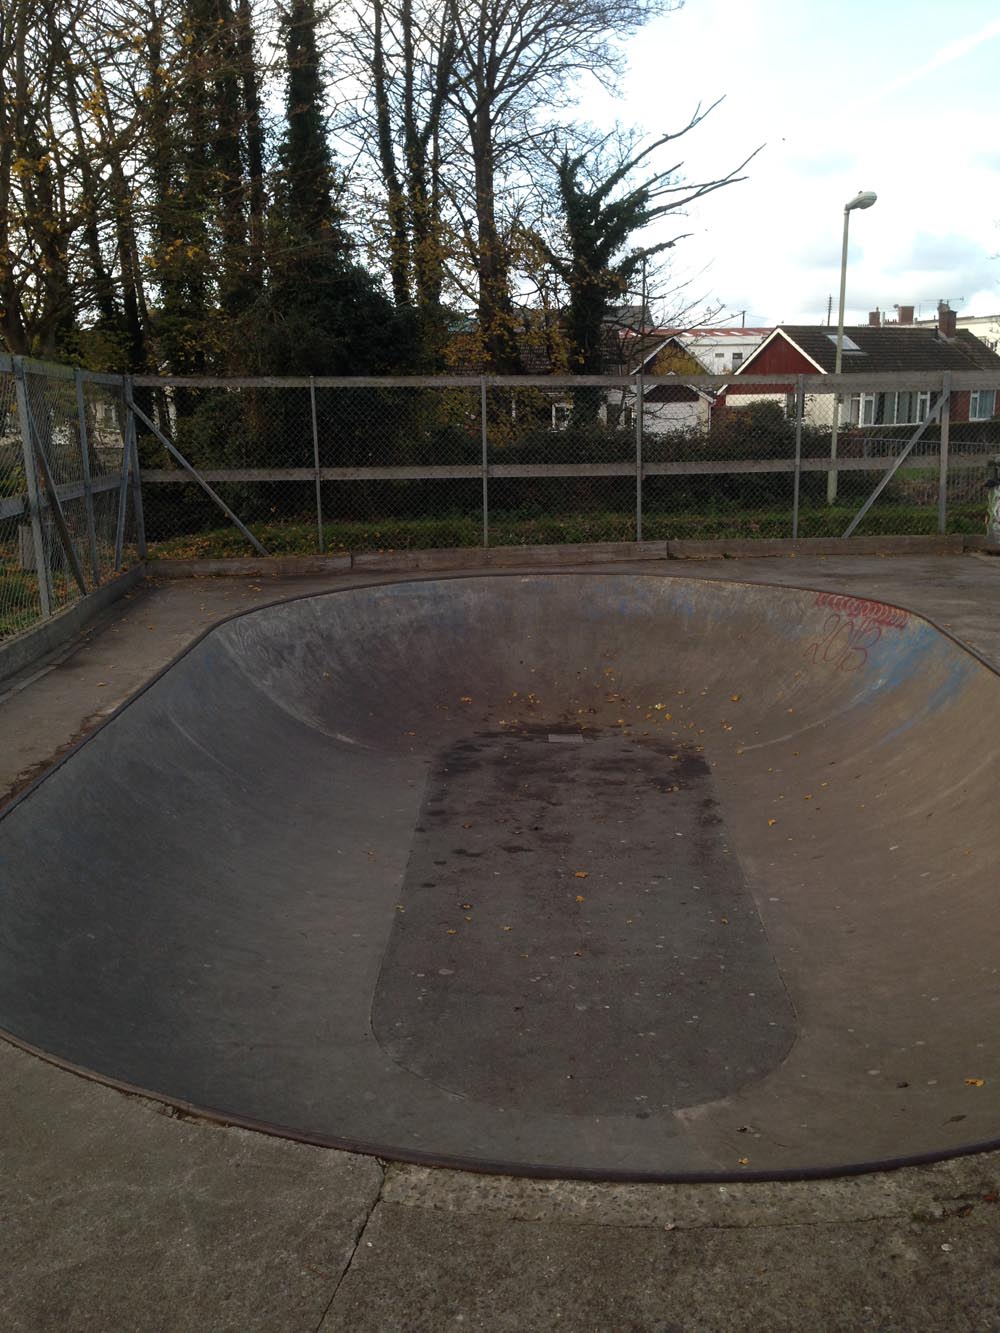 Braunton skate bowl fundraising appeal launched